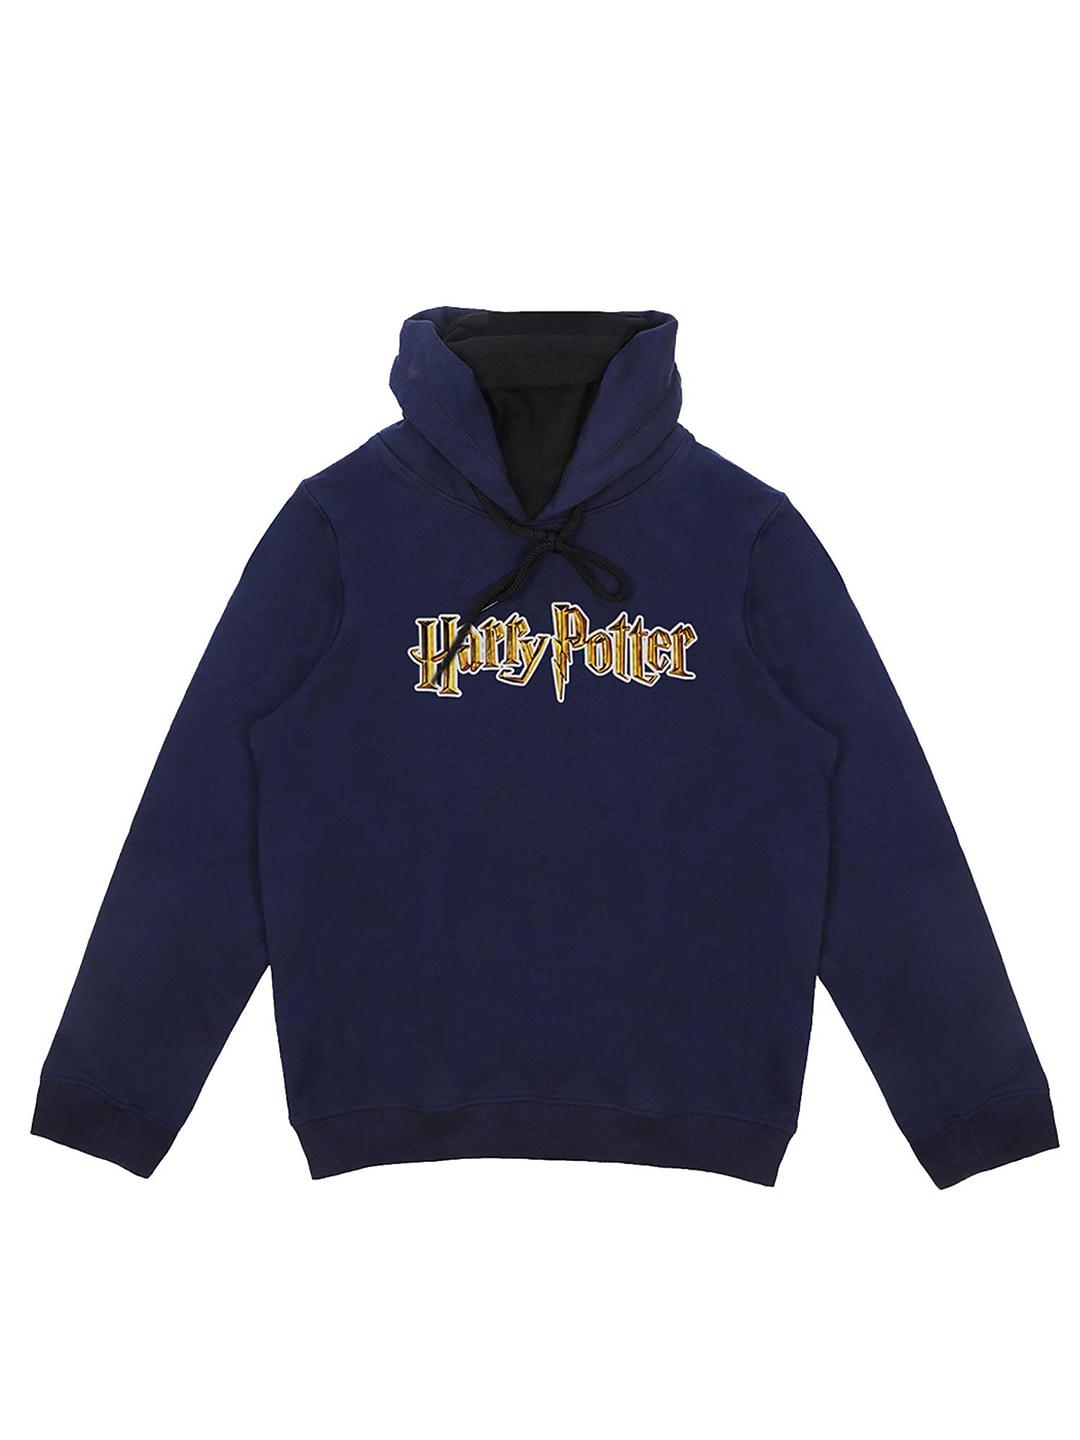 Harry Potter by Wear Your Mind Boys Navy Blue Harry Potter Printed Hooded Sweatshirt